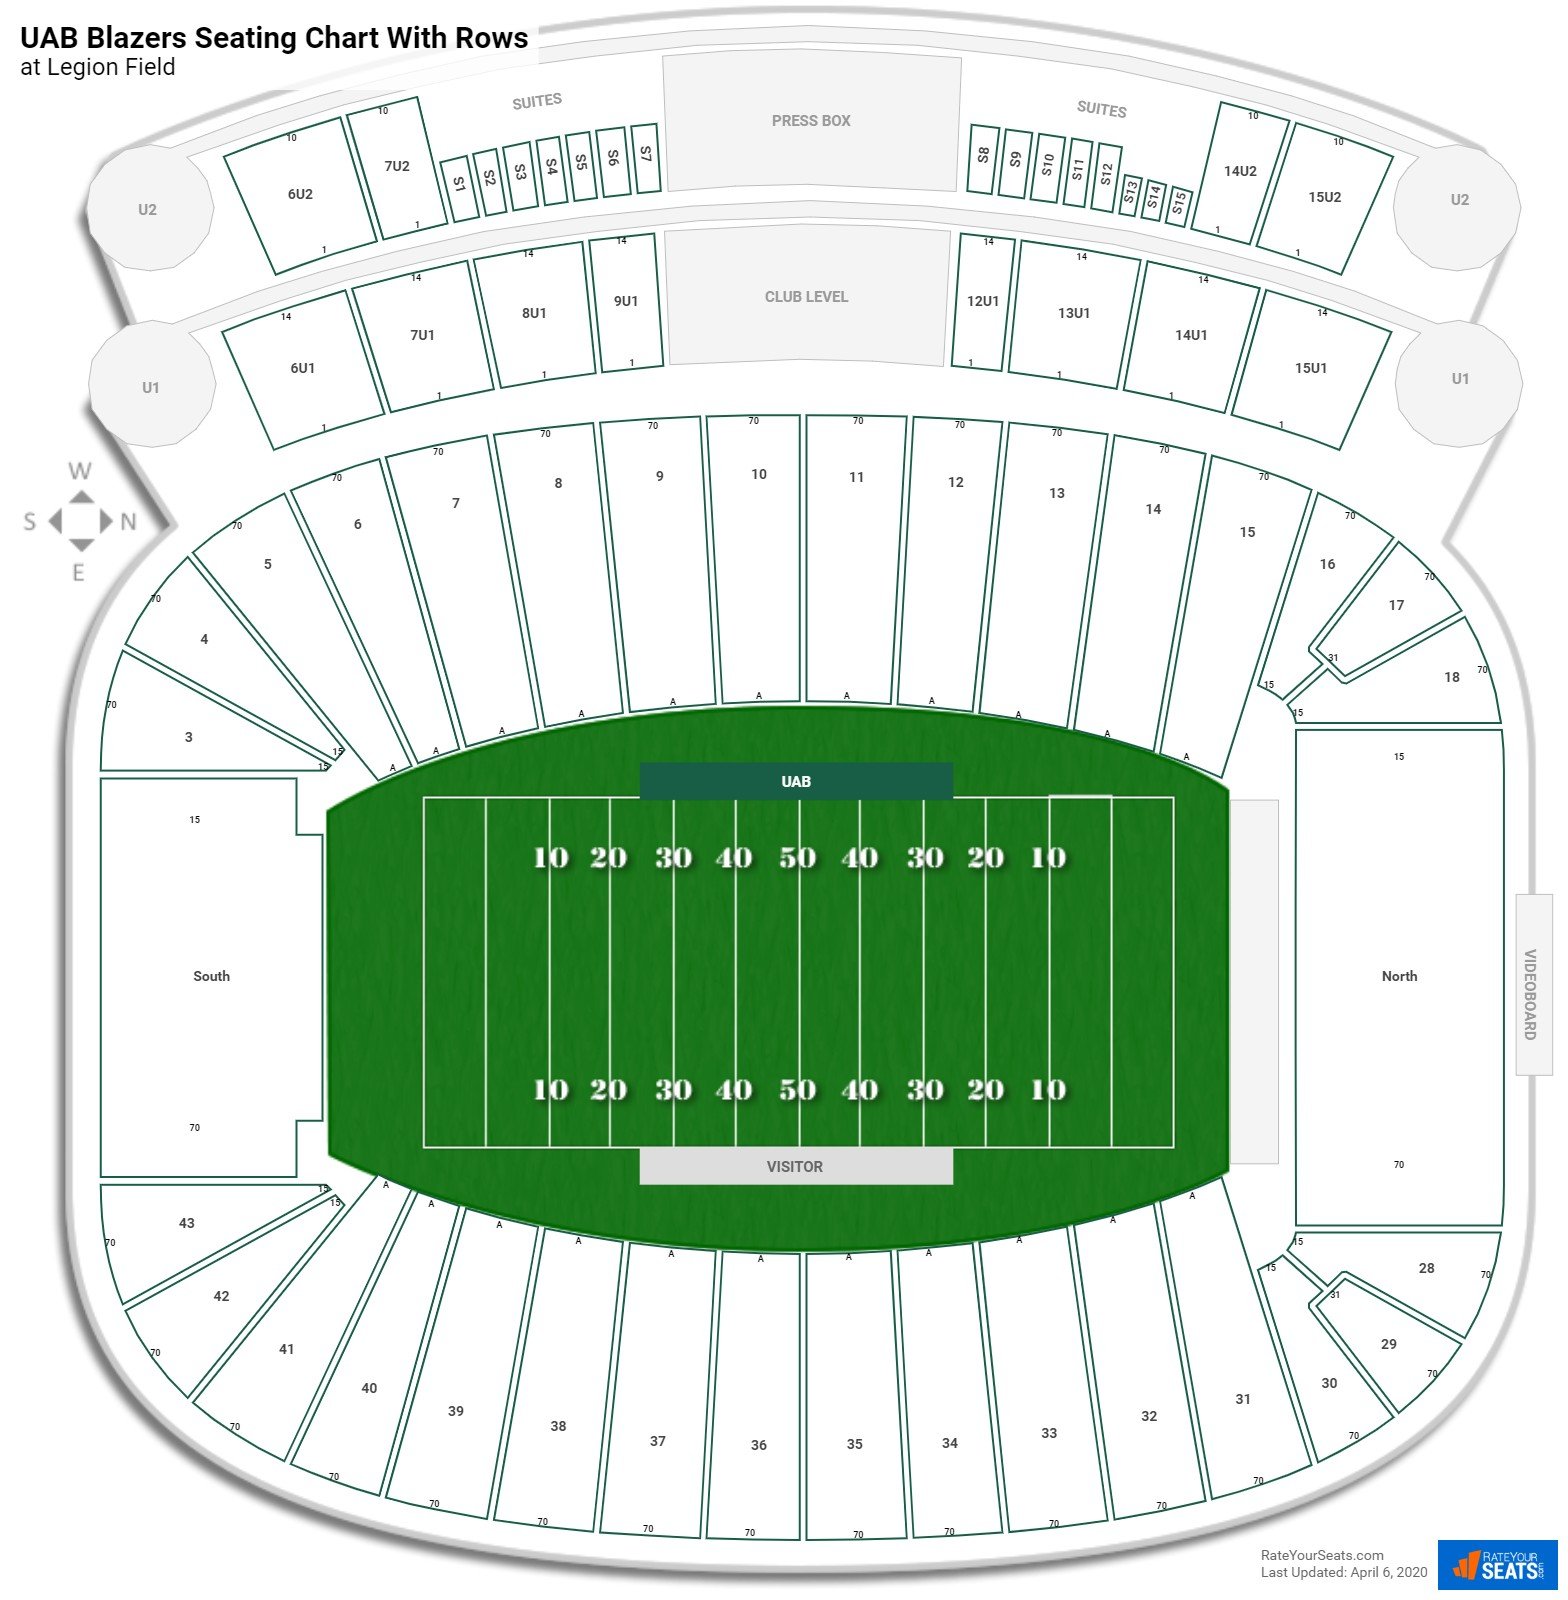 Legion Field seating chart with row numbers